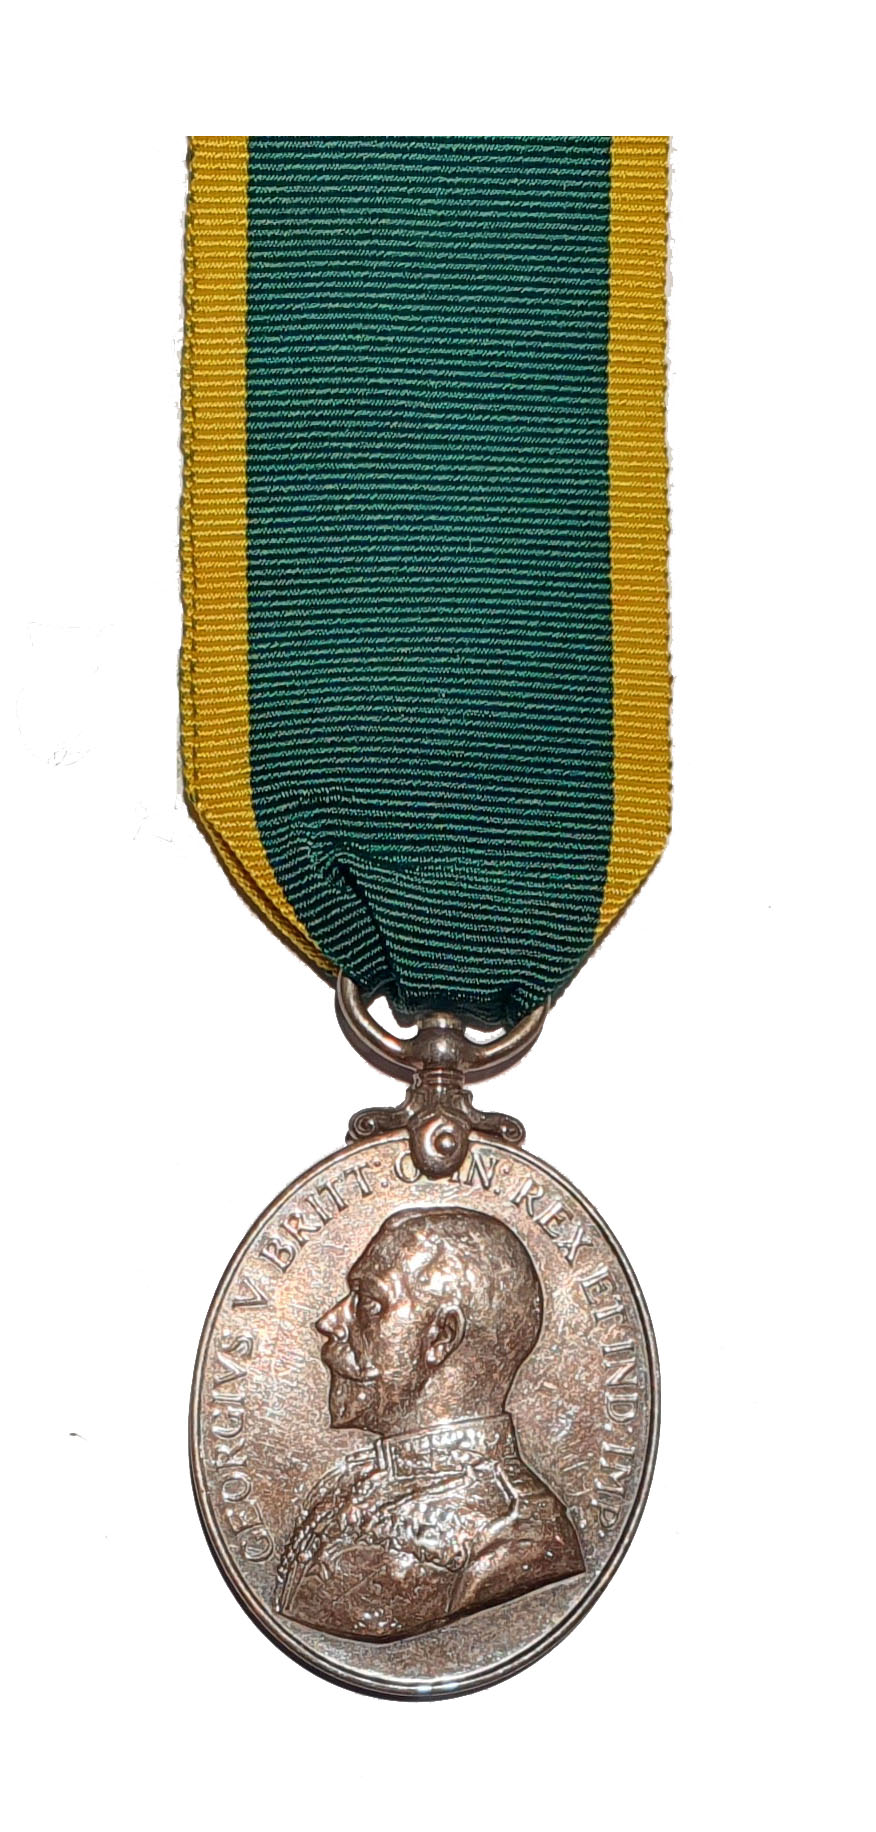 Territorial Force Efficiency Medal, GVR awarded to Serjeant Harold P. Jesson